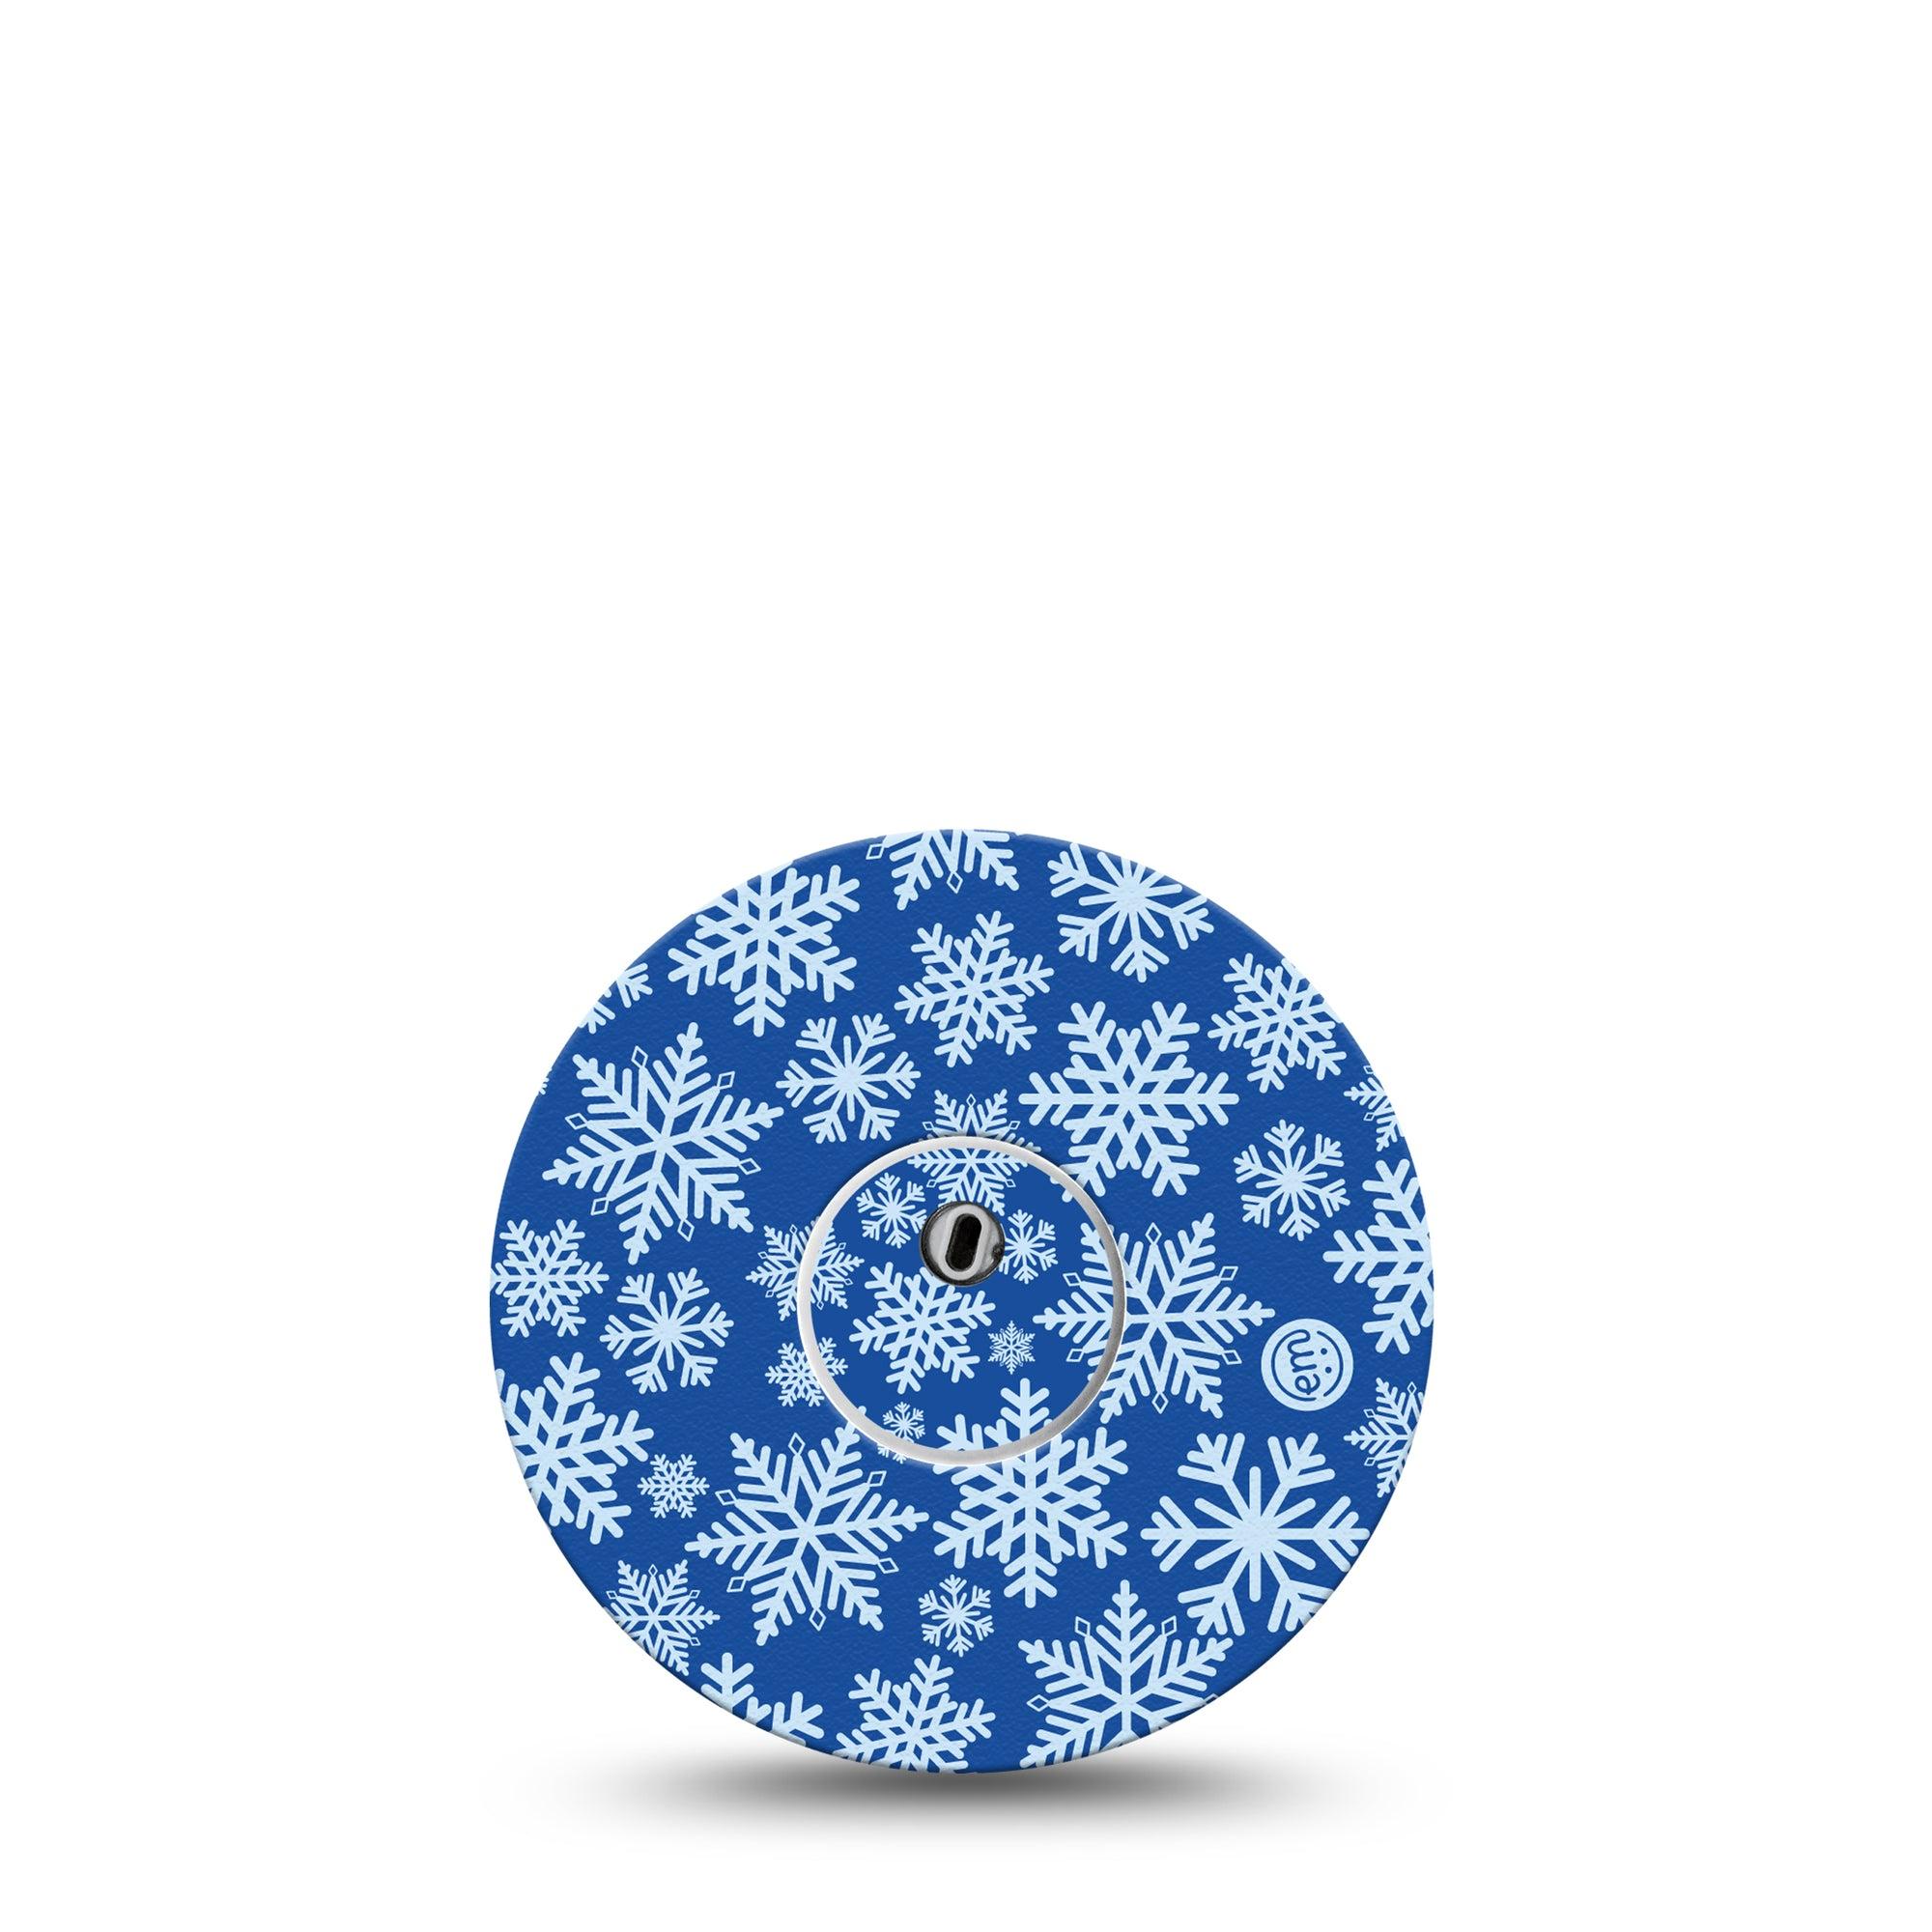 ExpressionMed Libre 3 Transmitter Sticker Blue Ice Frost, Crystal Snow, Holiday Themed Design, Tape and Sticker